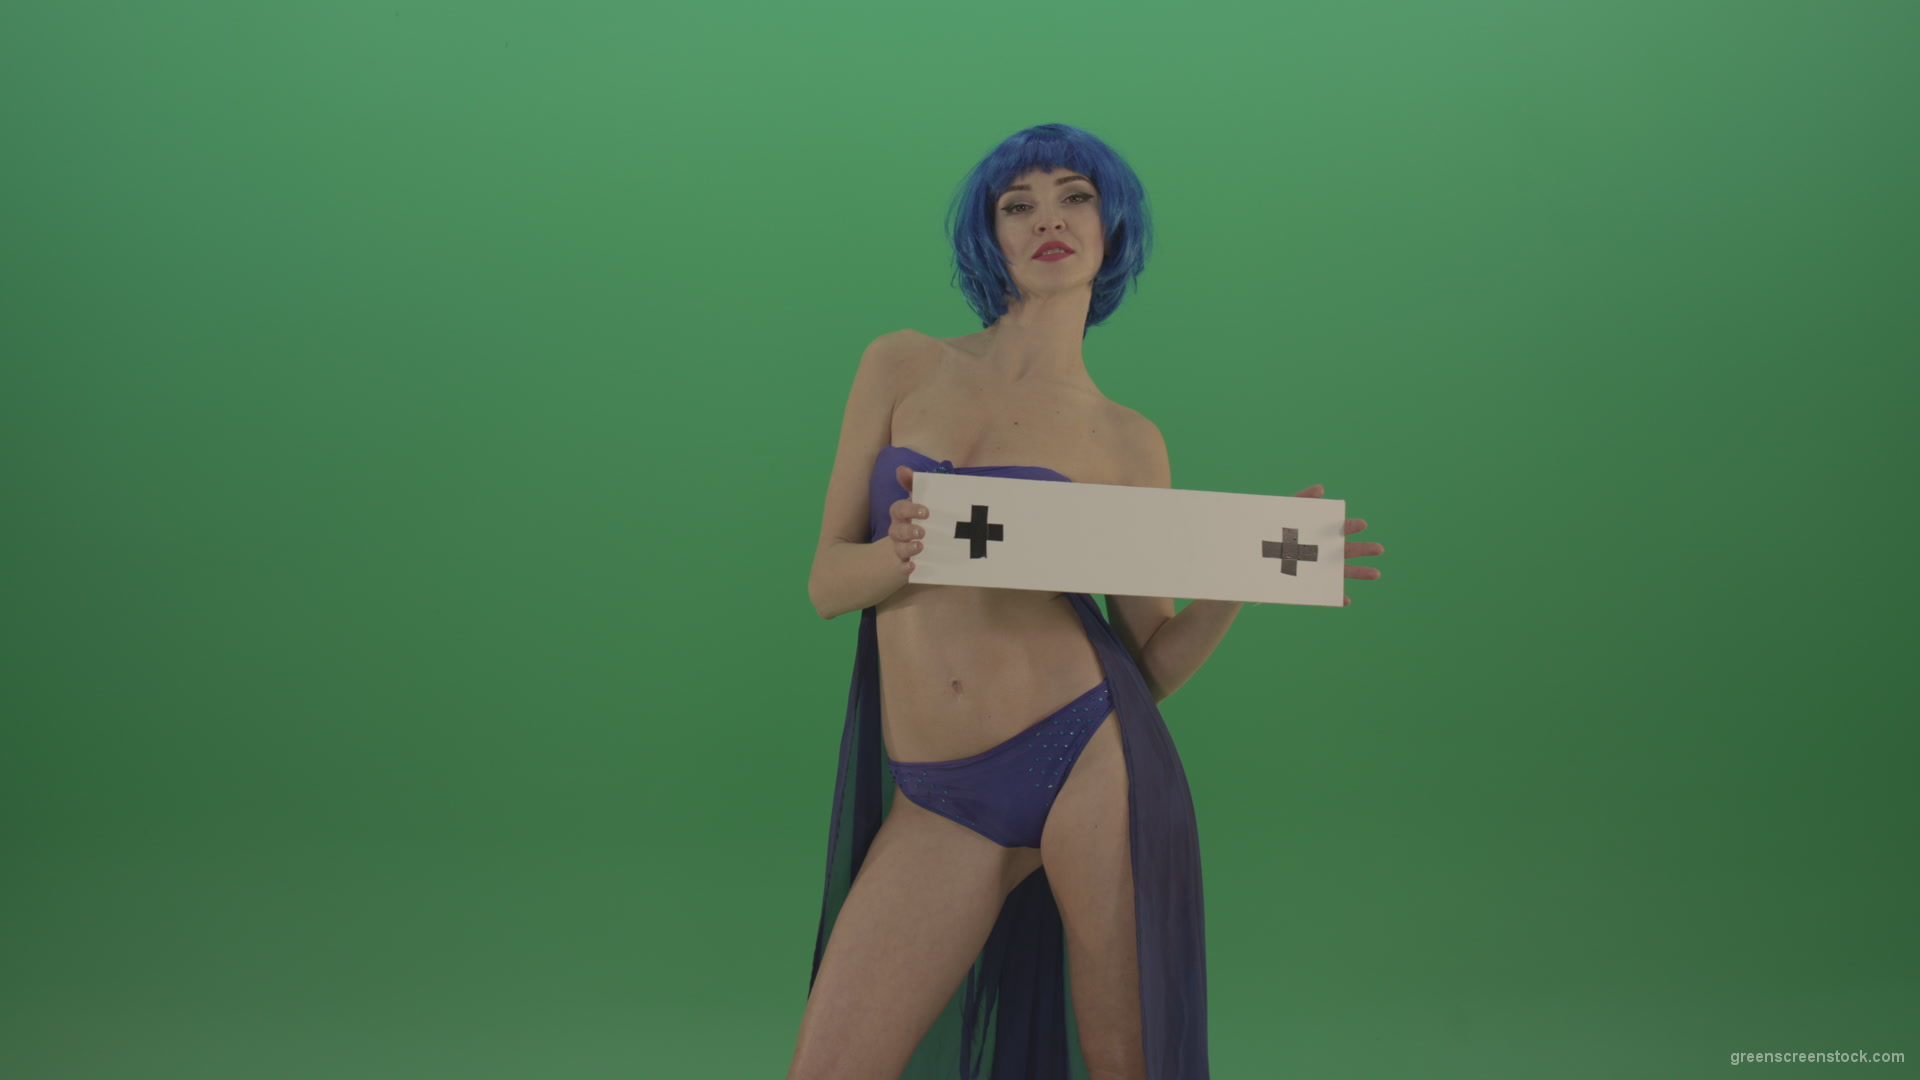 vj video background Blue-hair-elegant-naked-girl-posing-with-text-mockup-template-plane-on-green-screen_003